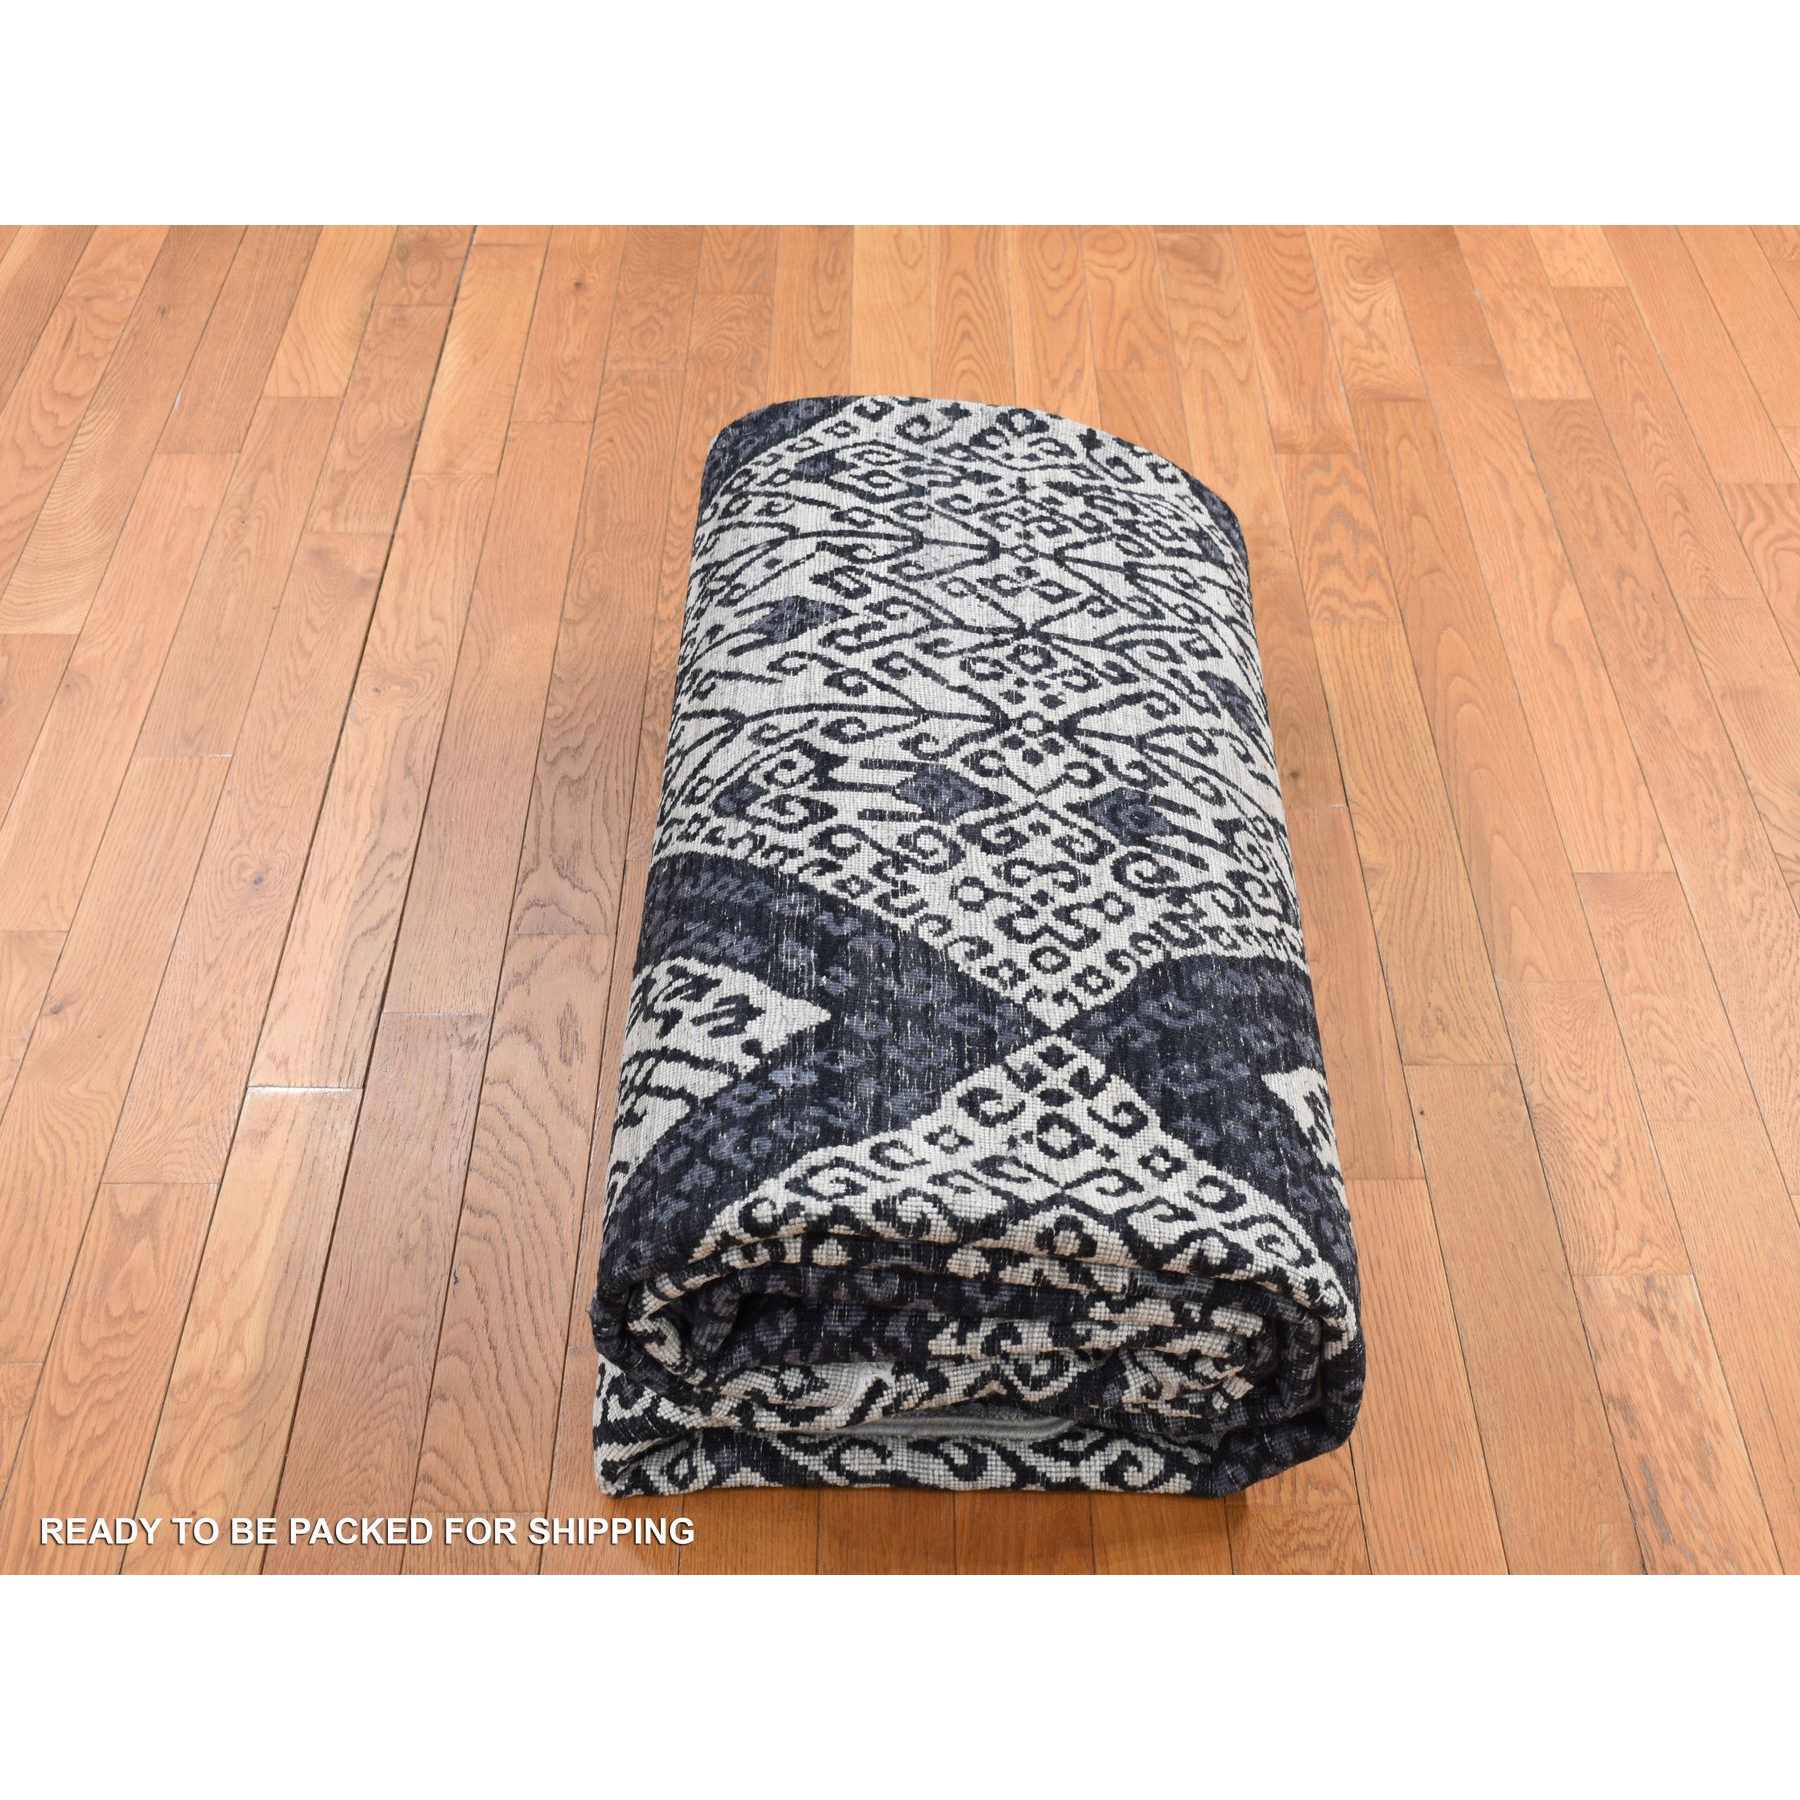 Silk-Hand-Knotted-Rug-435395